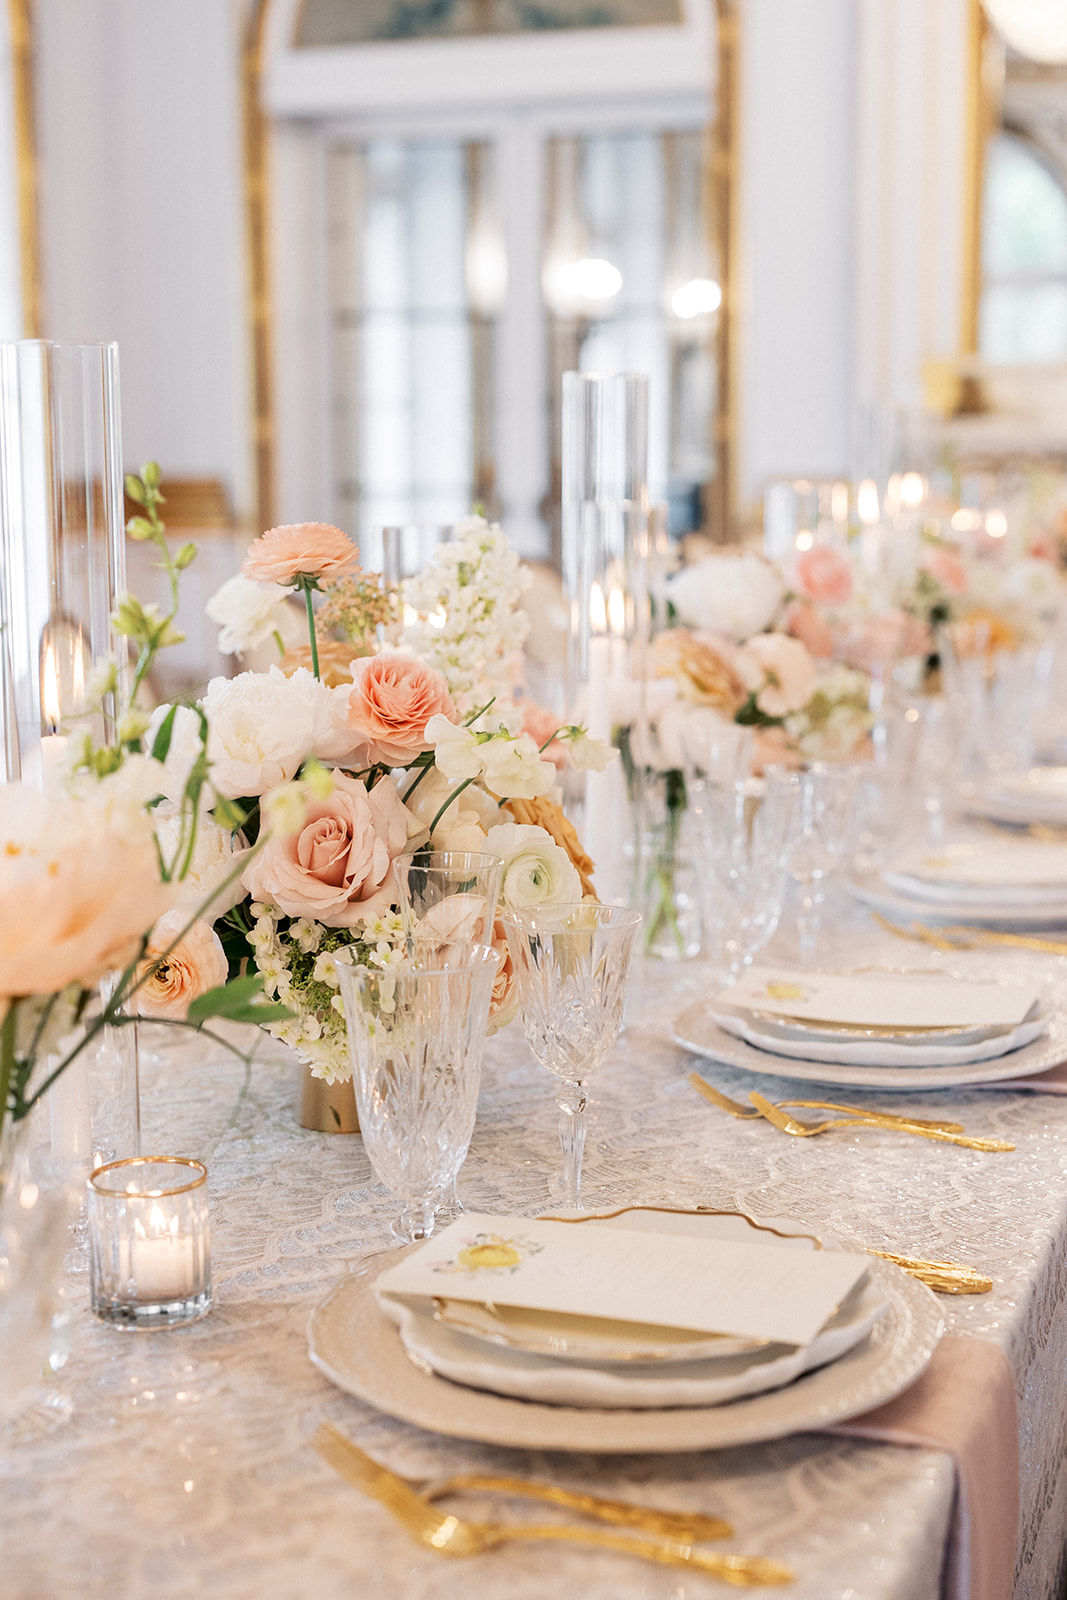 Details of a wedding reception table with pink rose centerpieces